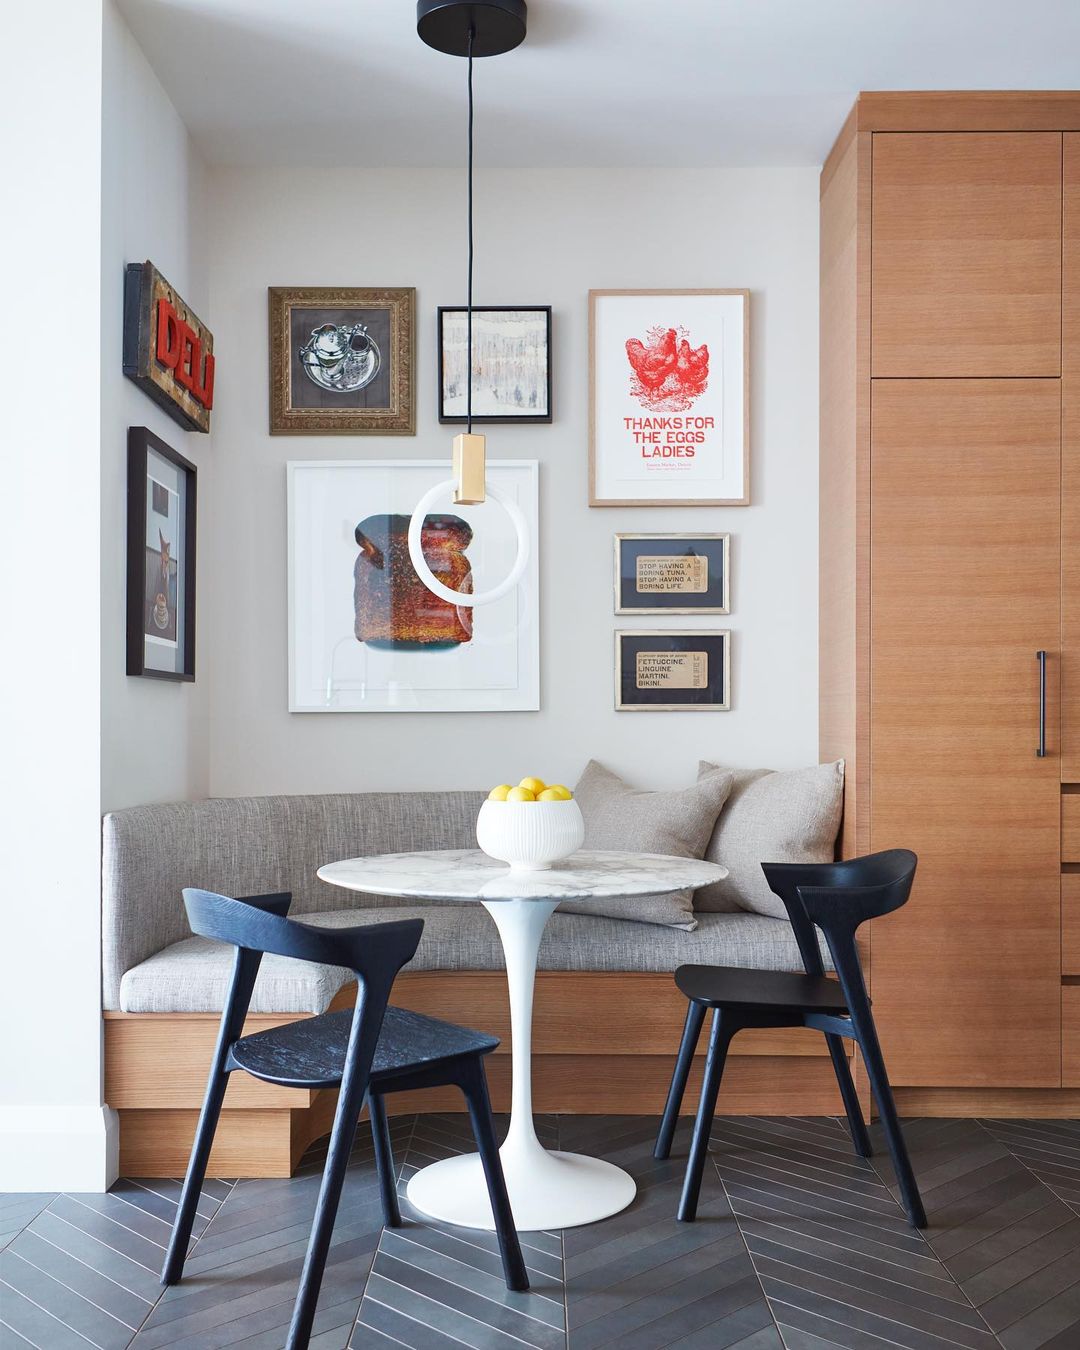 Best Banquette Seating Ideas: Fit More Function into Small Spaces